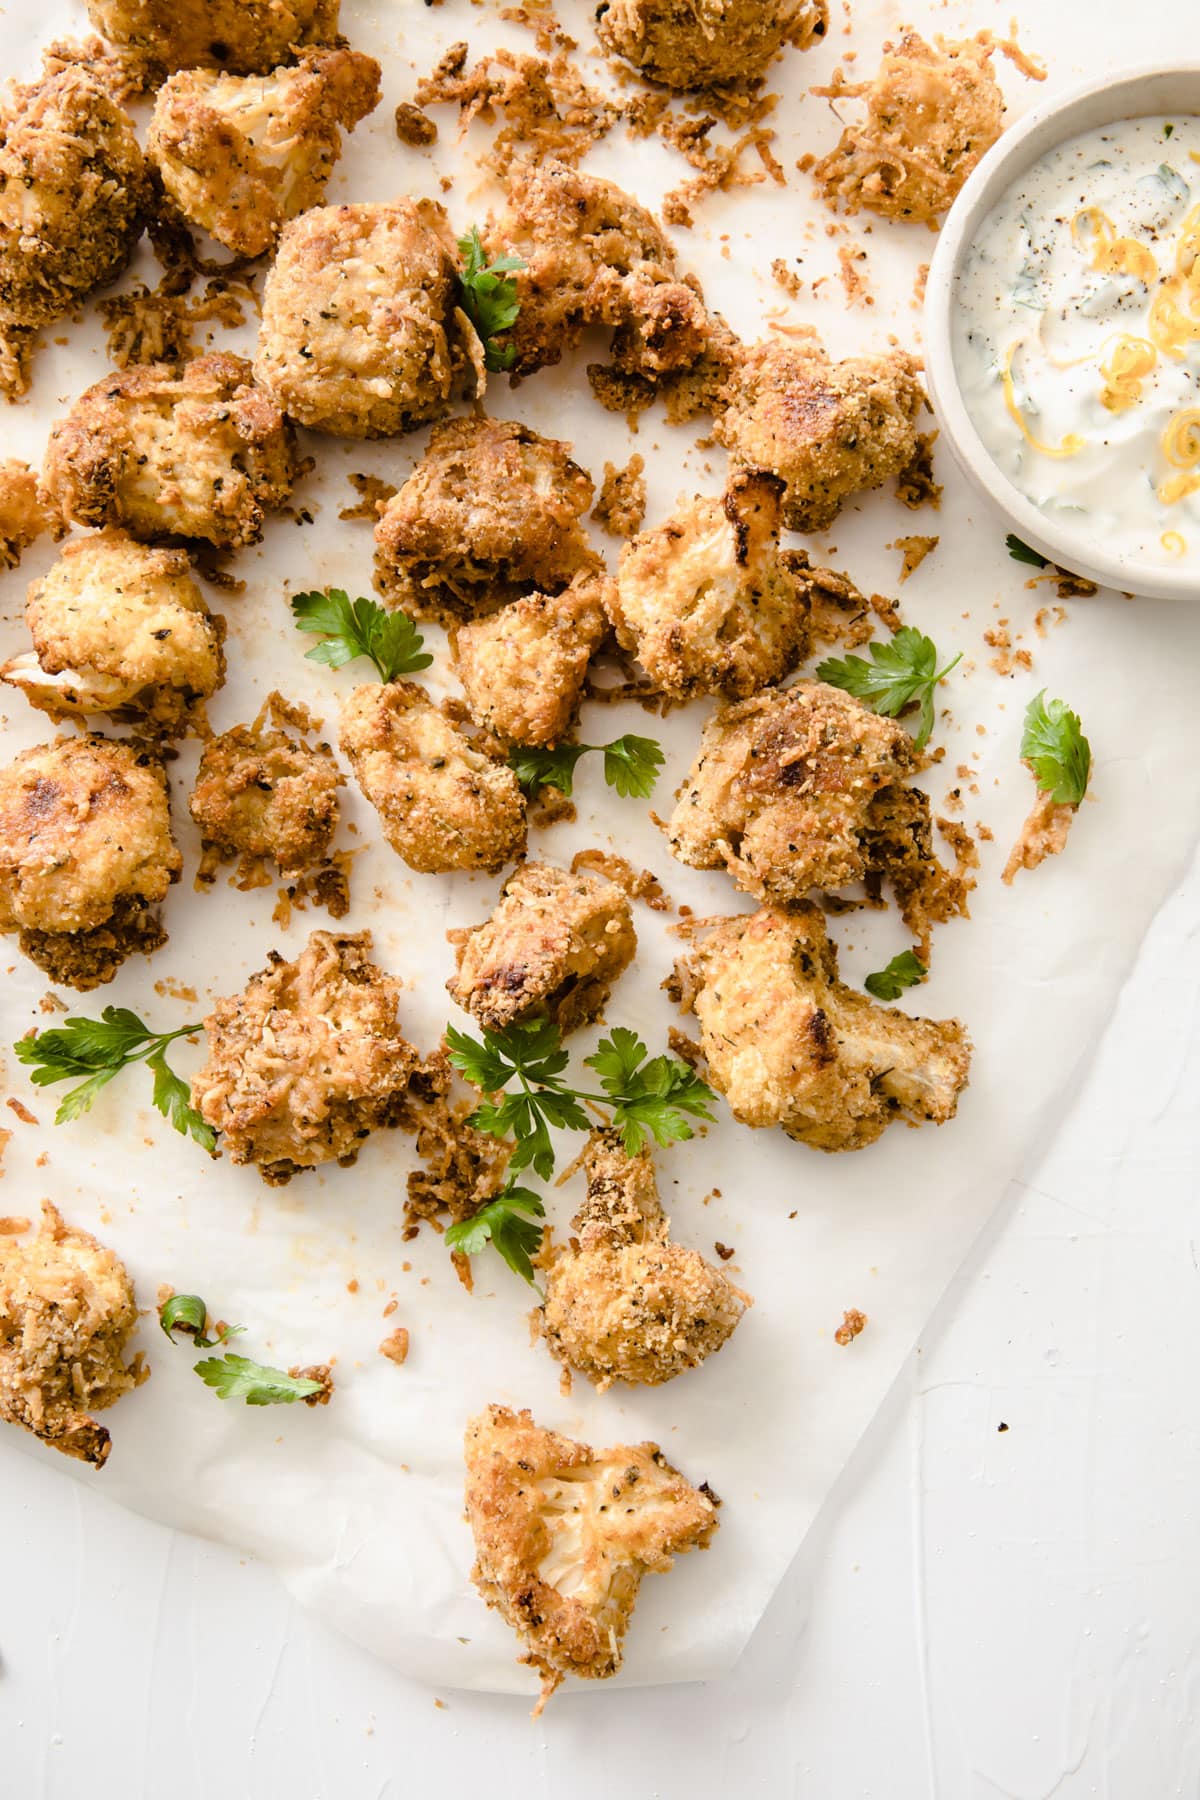 Cauliflower popcorn on parchment paper with a dip.